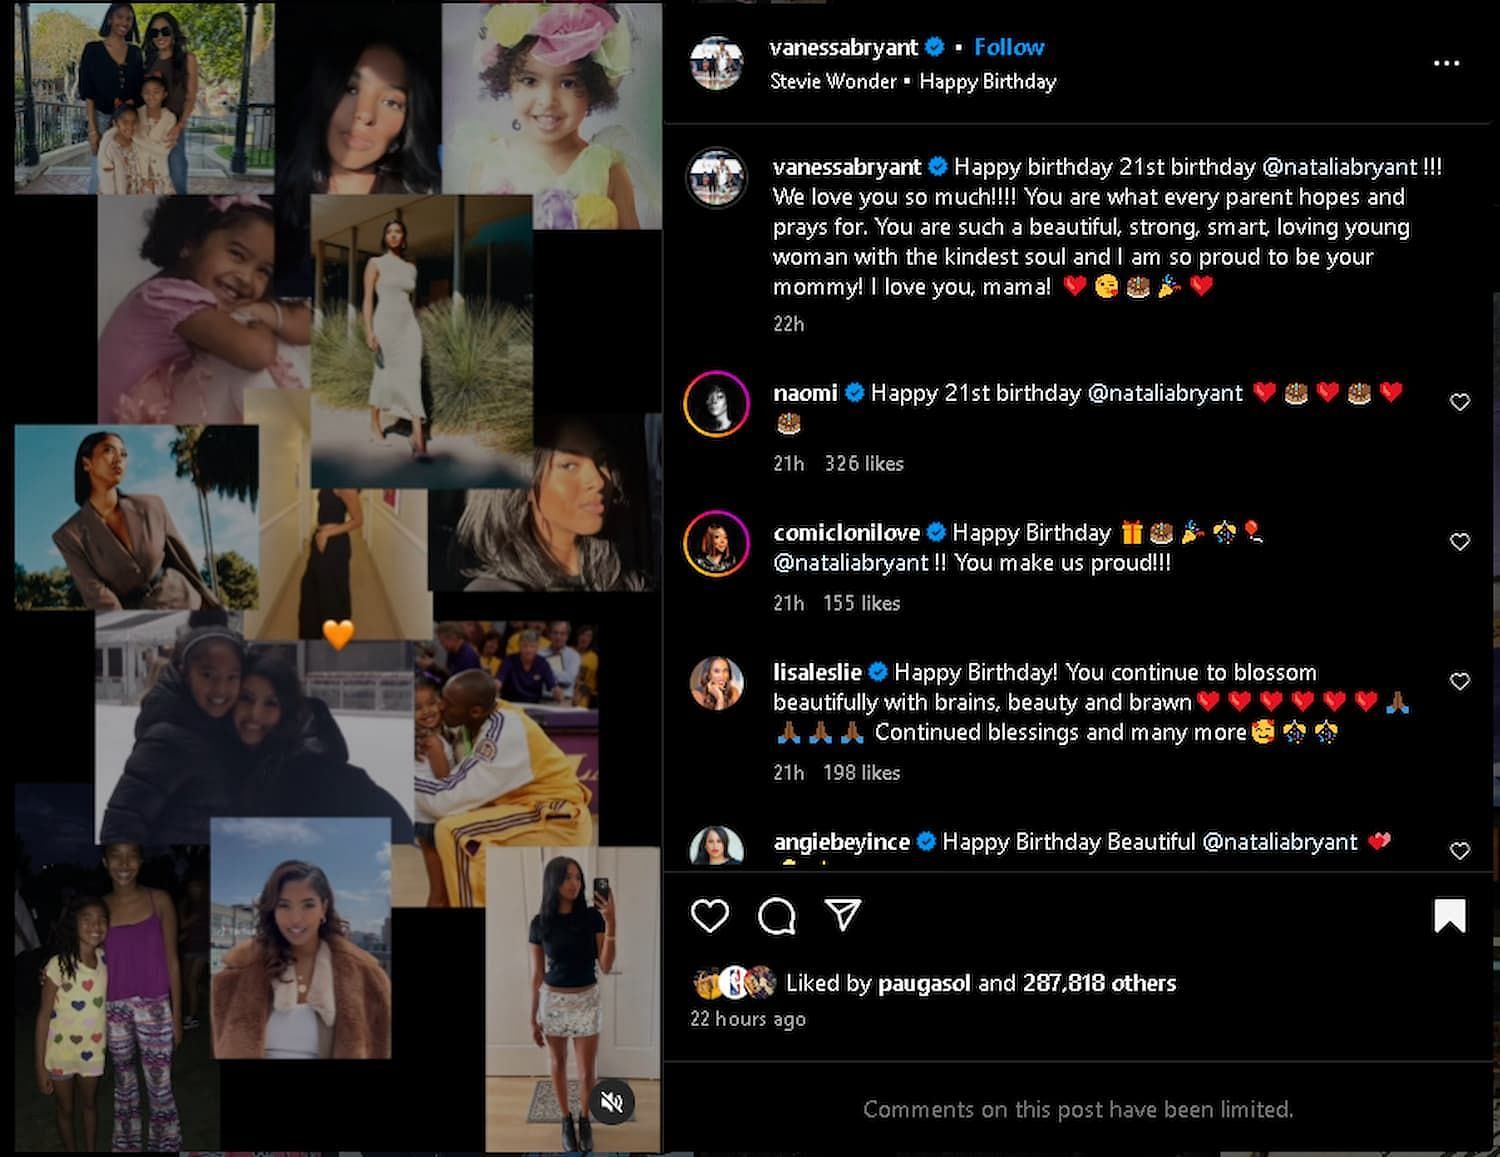 Vanessa Bryant greets Natalia with a beautiful message on her birthday